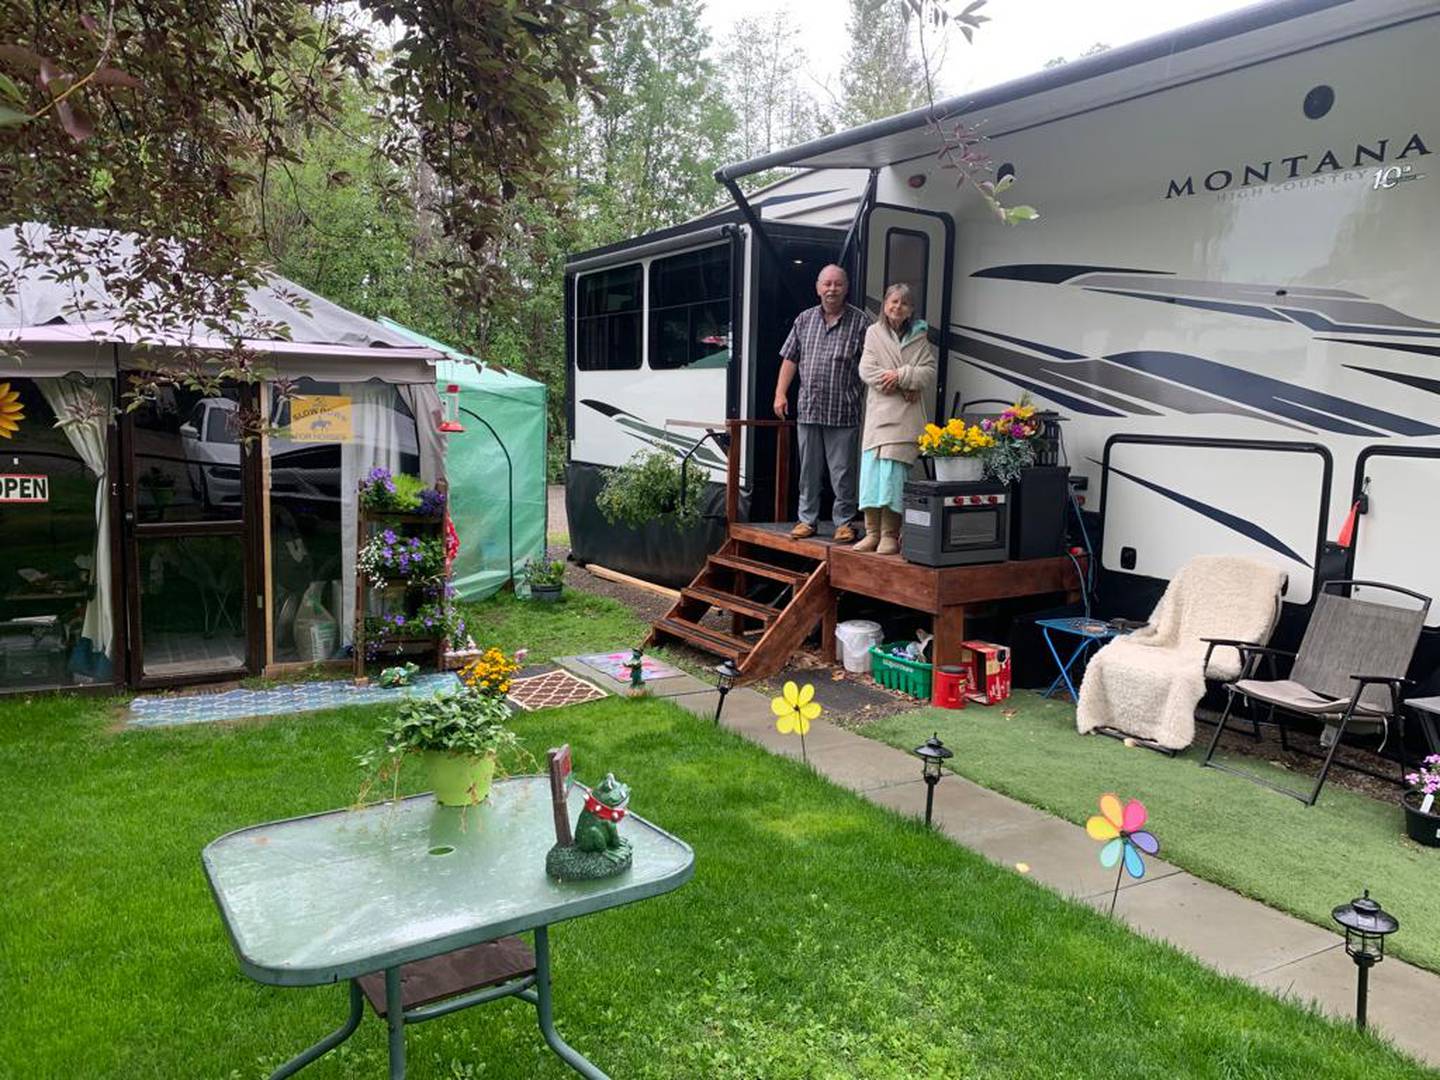 Tip2Top in Canada: Mike and Wendy who live in Northland RV Park